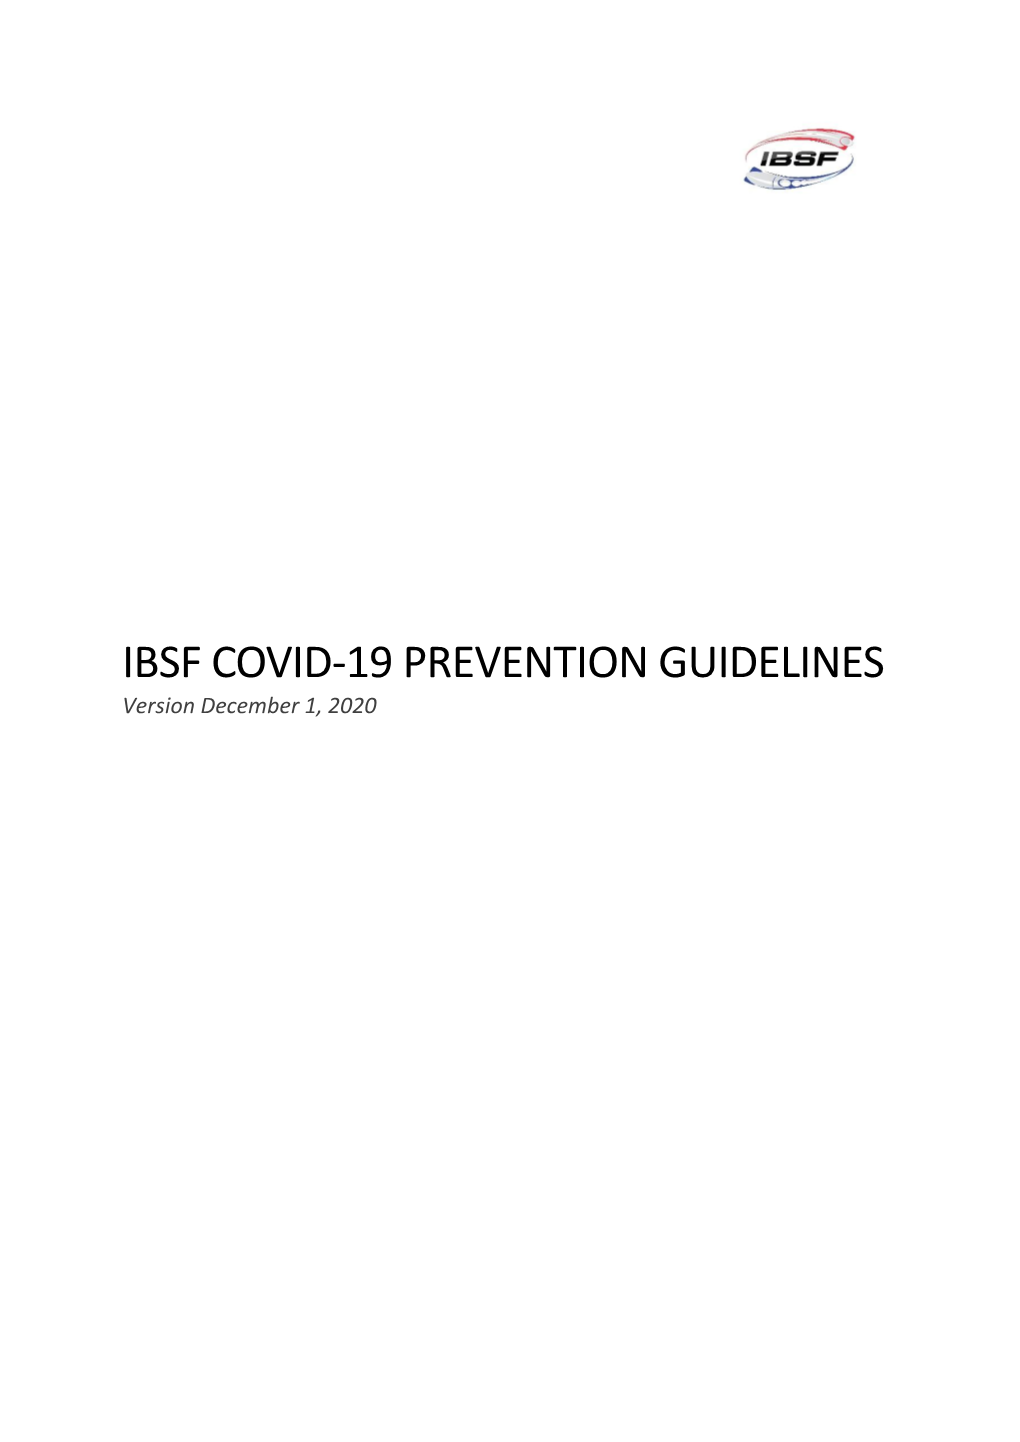 IBSF COVID-19 PREVENTION GUIDELINES Version December 1, 2020